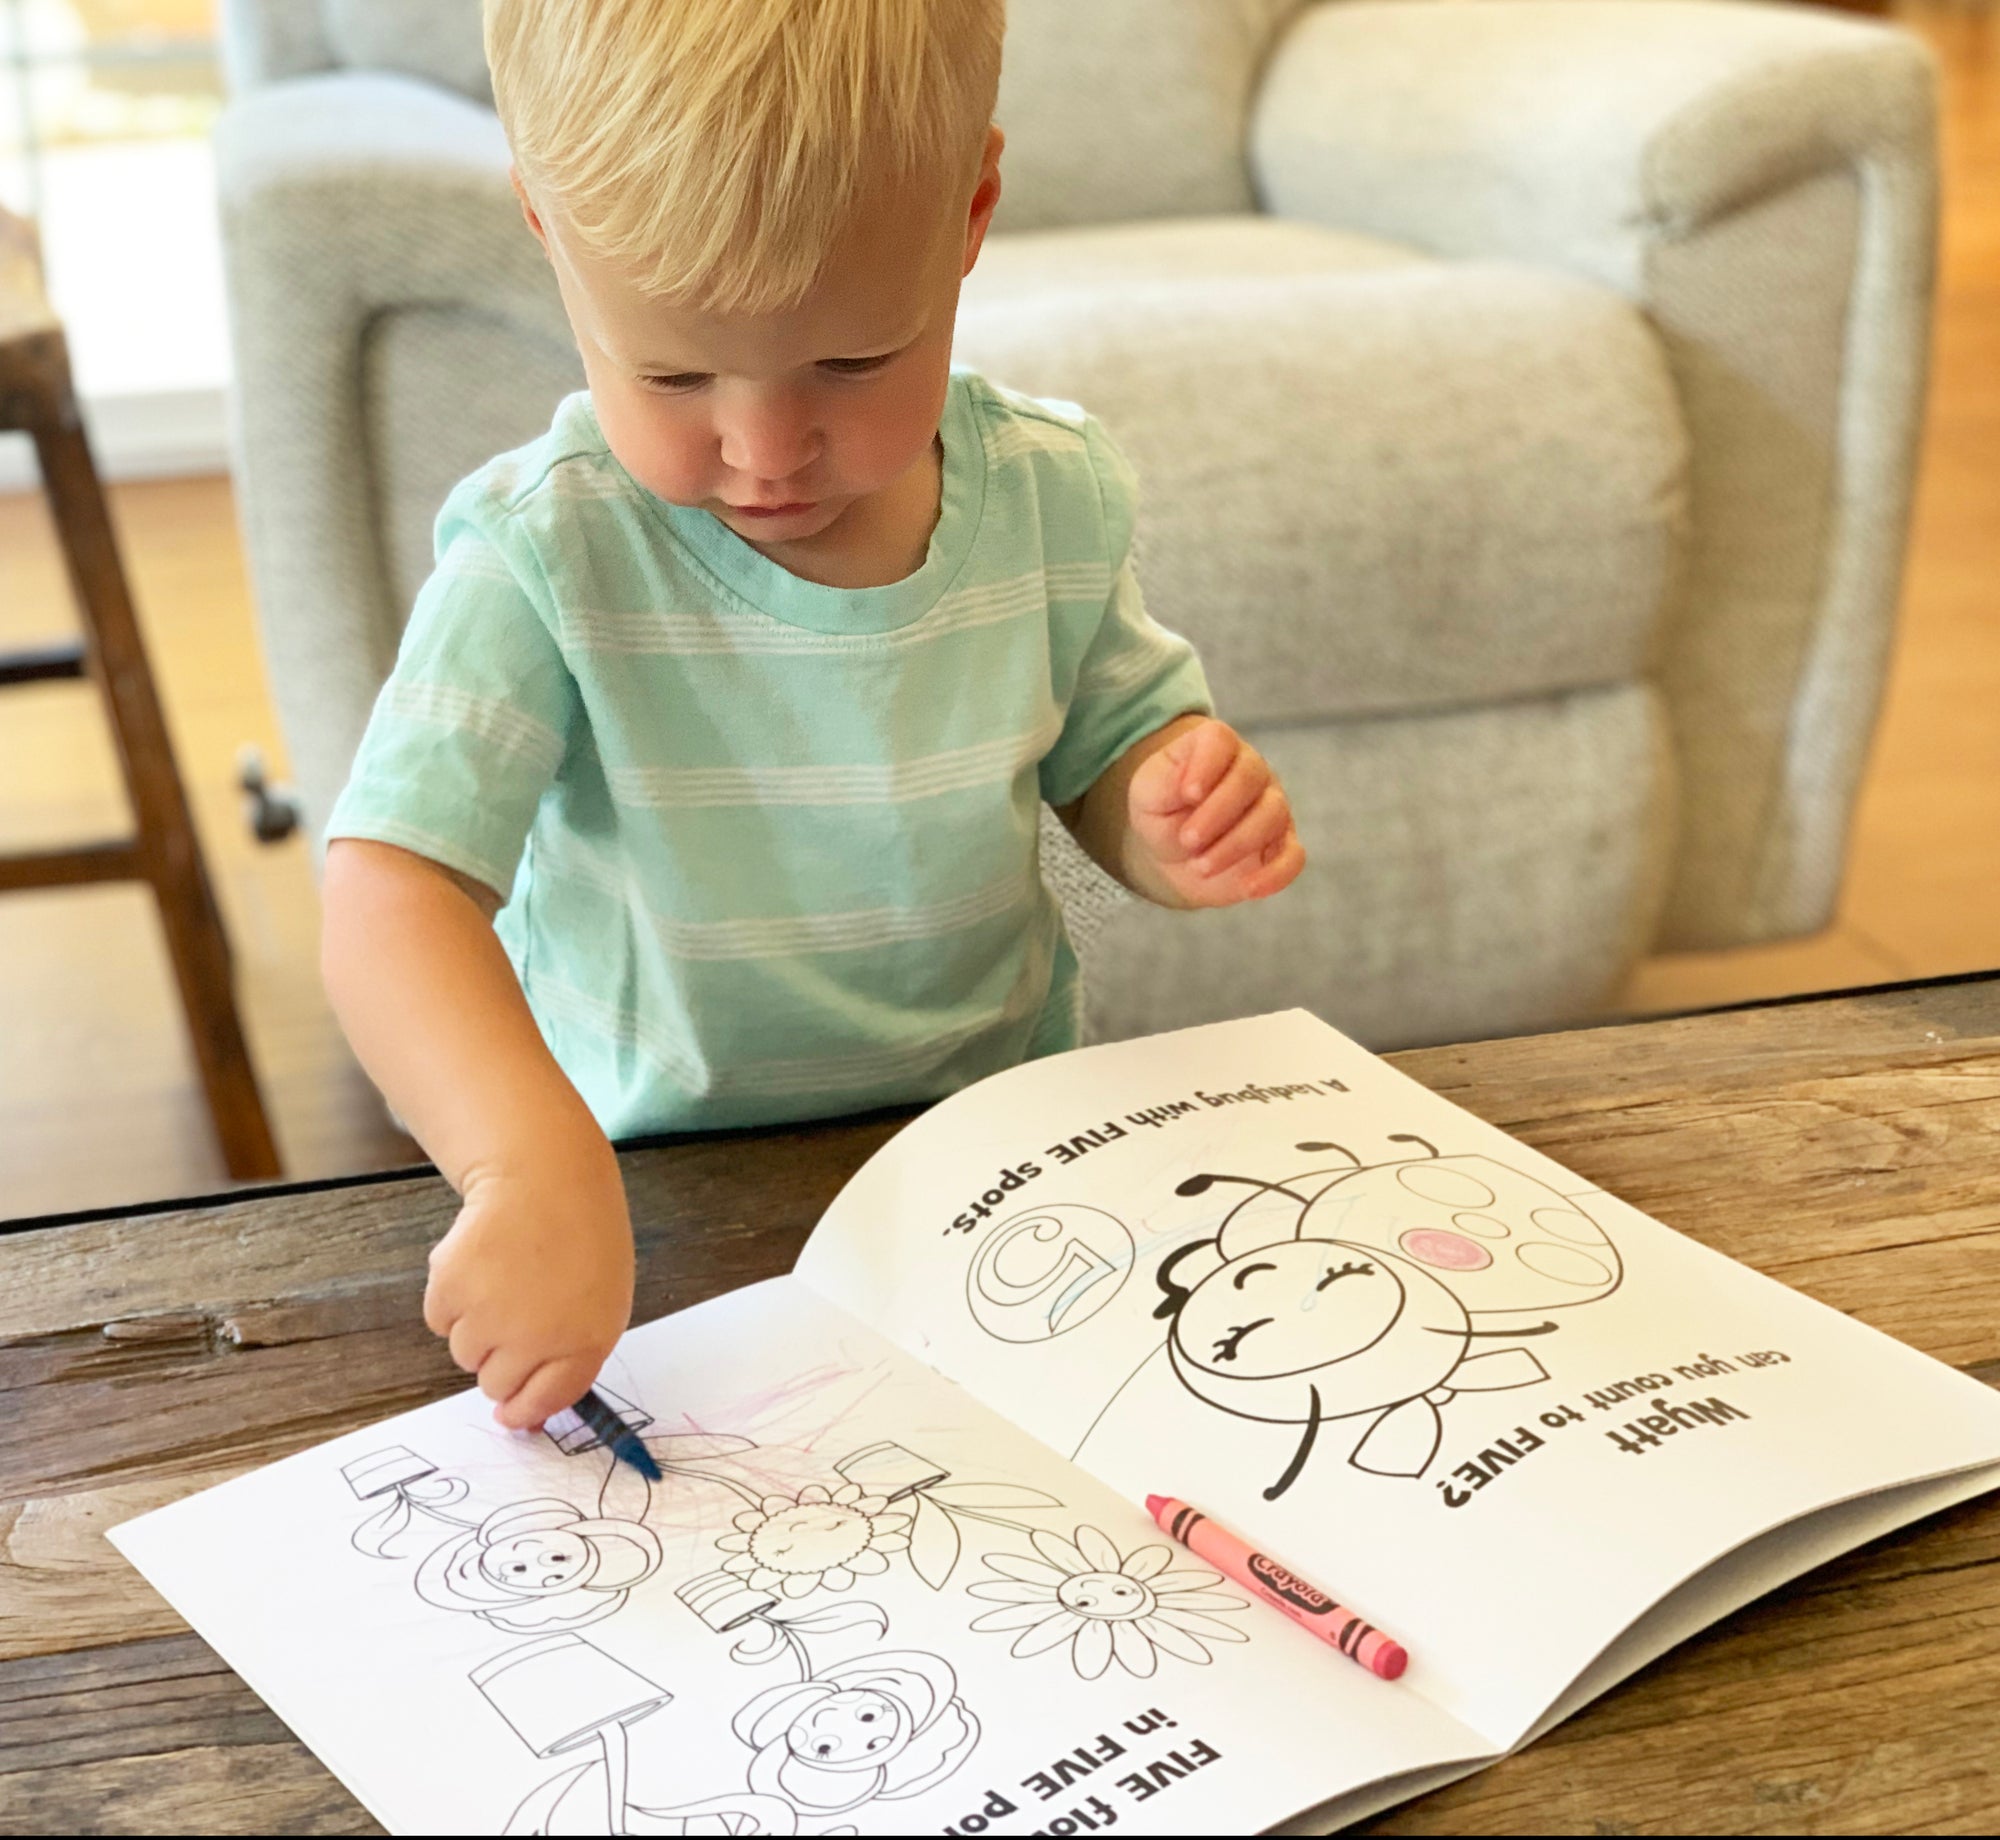 Toddler coloring in personalized coloring book.